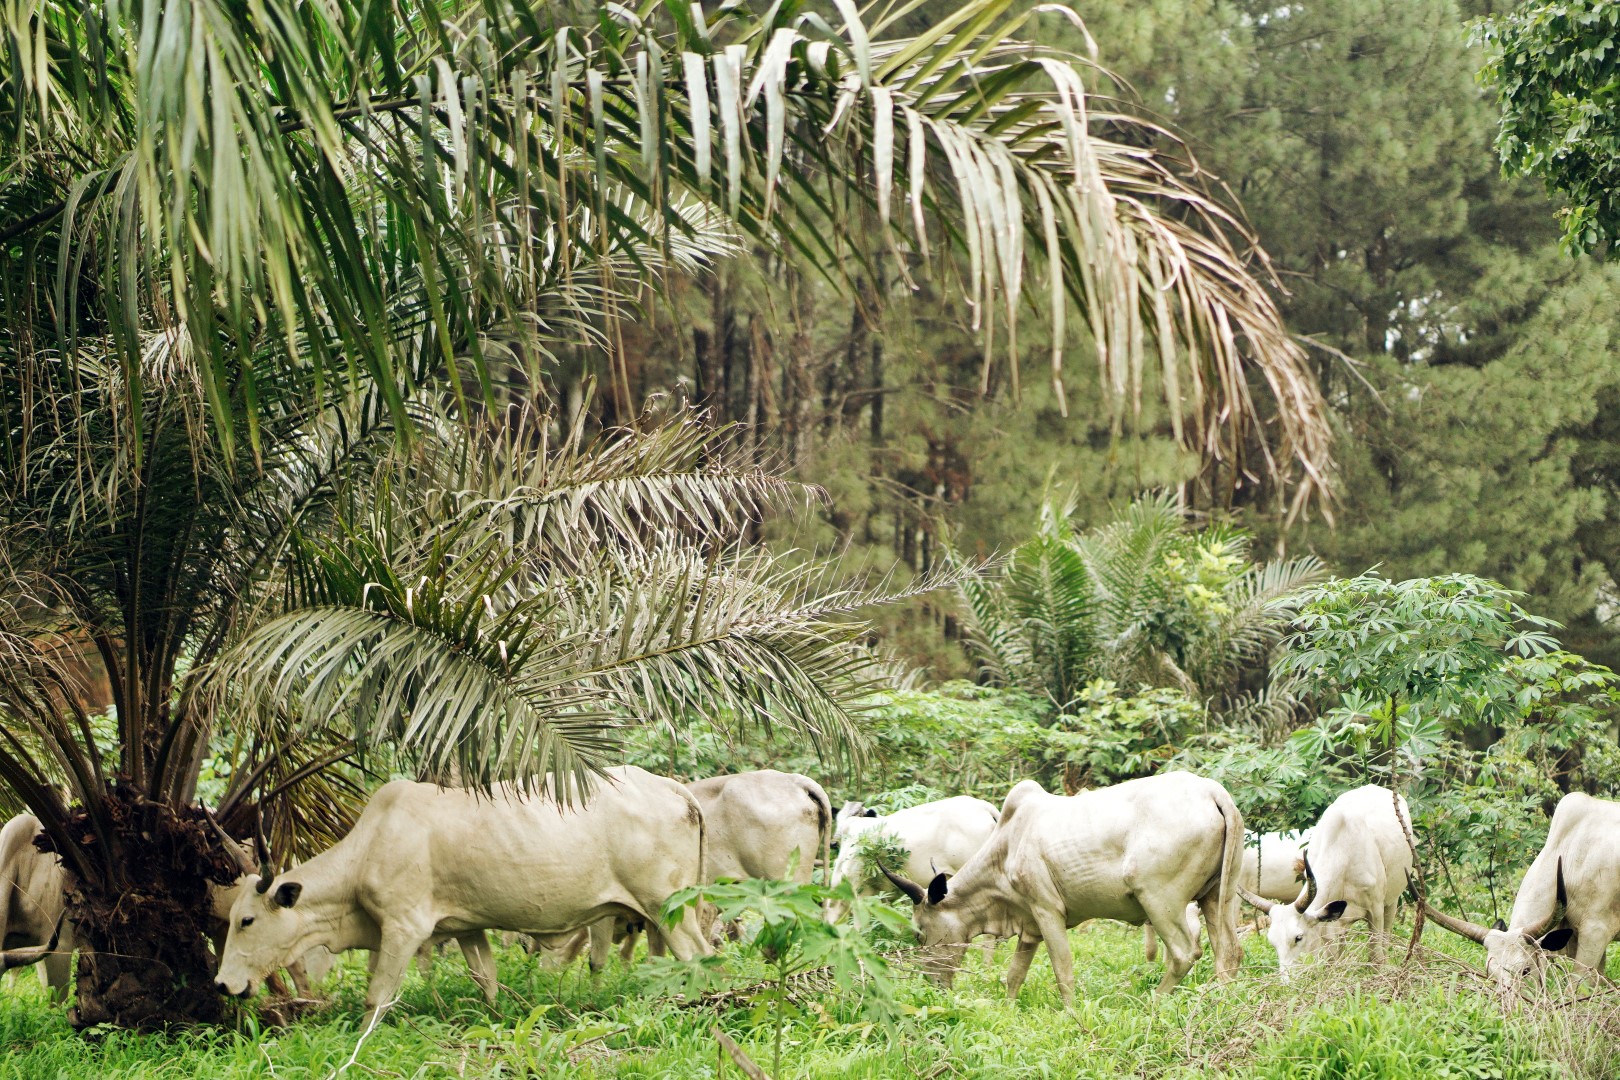 cows and herdsman at Ngwo pine forest in Enugu